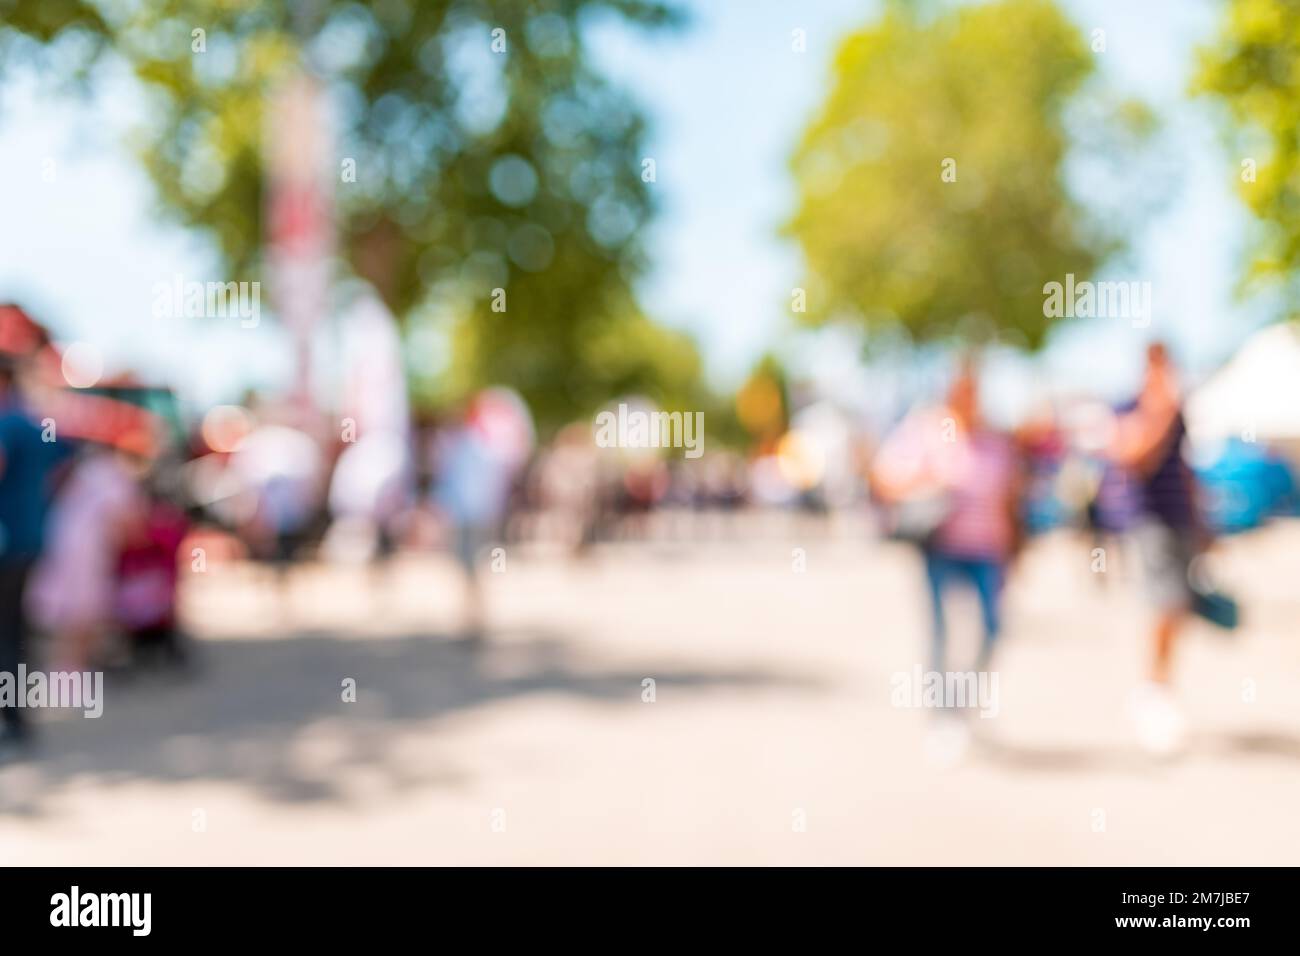 Group of people and community, blur crowd for society concept, selective focus Stock Photo